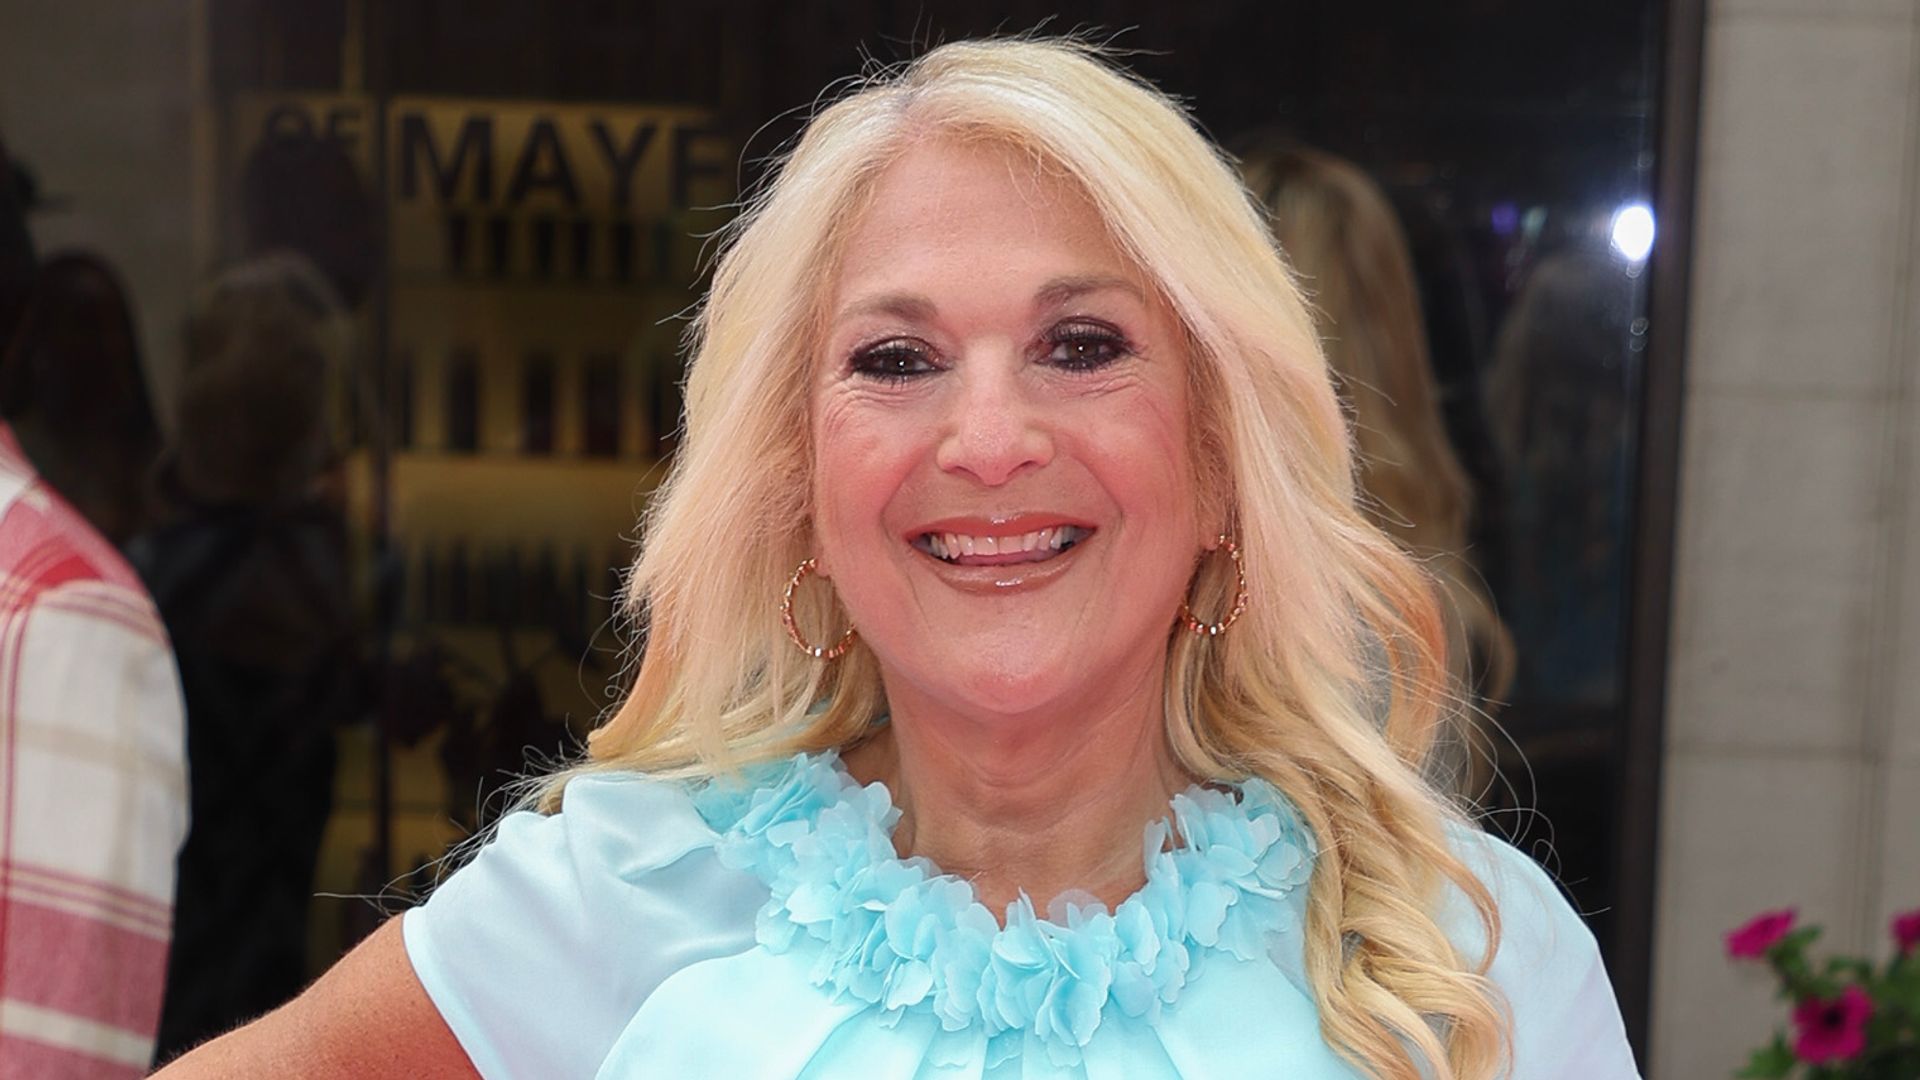 Vanessa Feltz attends The TRIC Awards 2023 at Grosvenor House on June 27, 2023 in London, England.